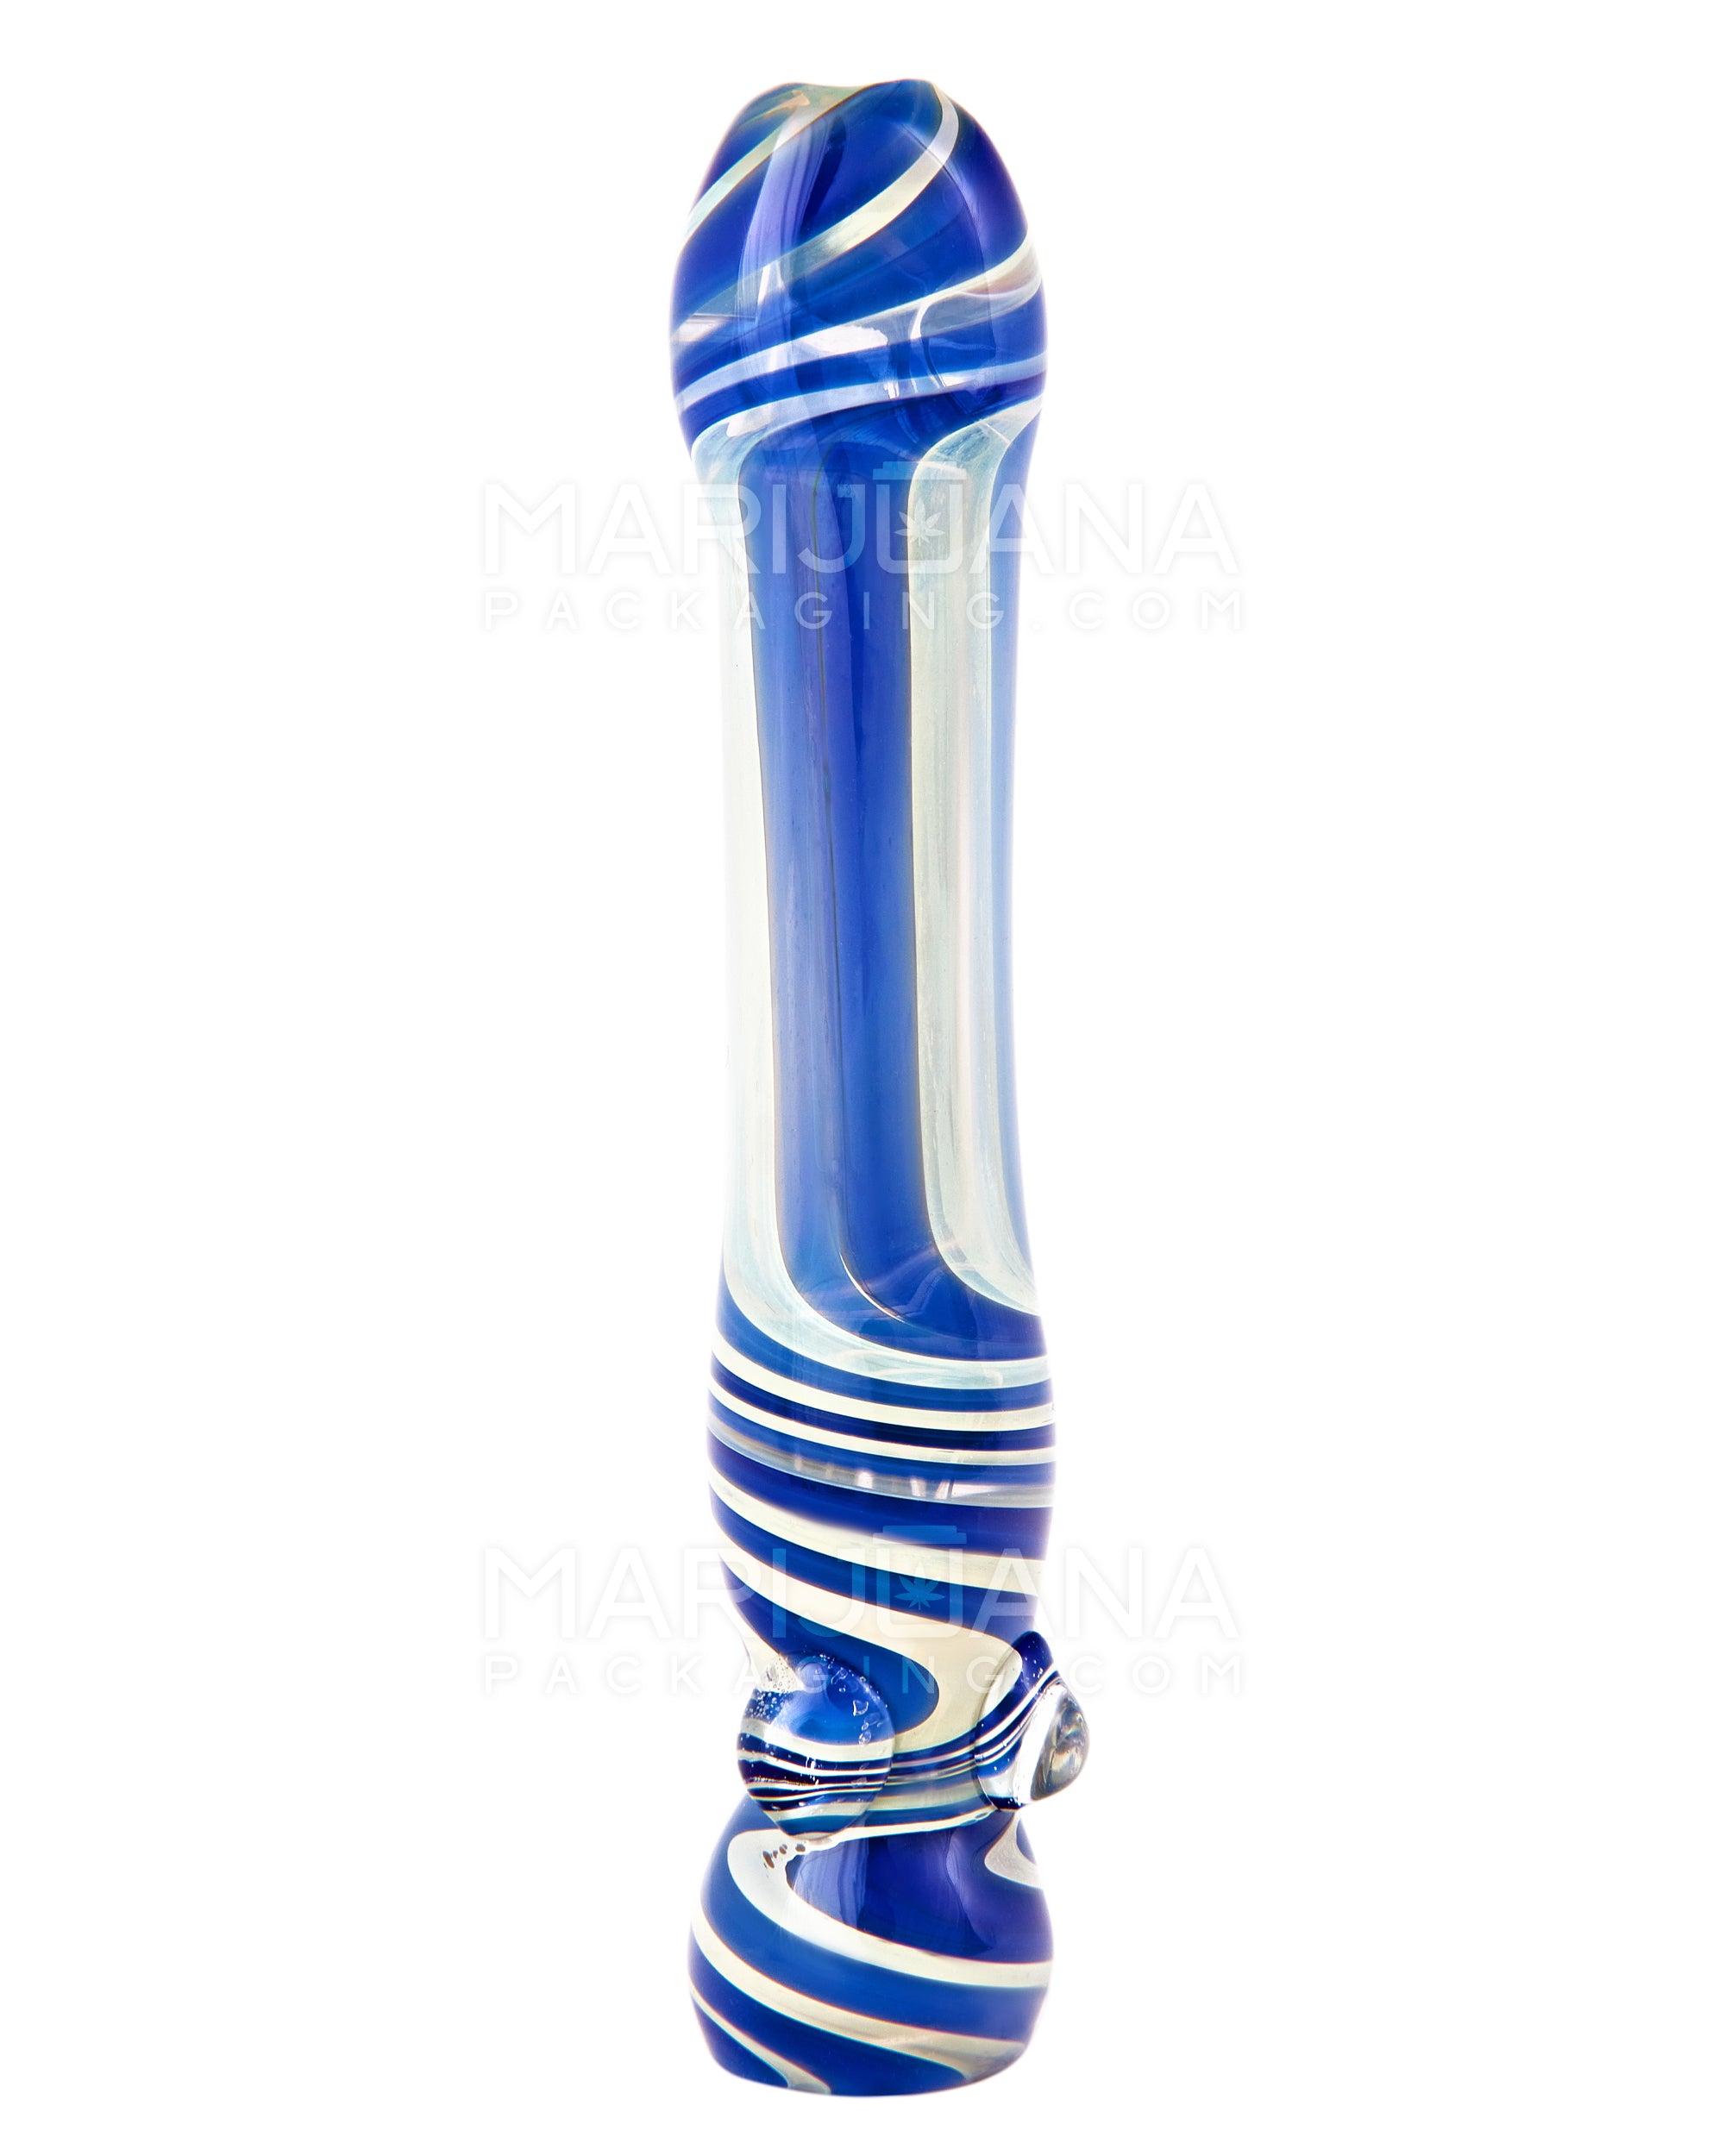 USA Glass | Swirl & Gold Fumed Chillum Hand Pipe w/ Triple Knockers | 3.5in Long - Glass - Assorted - 7